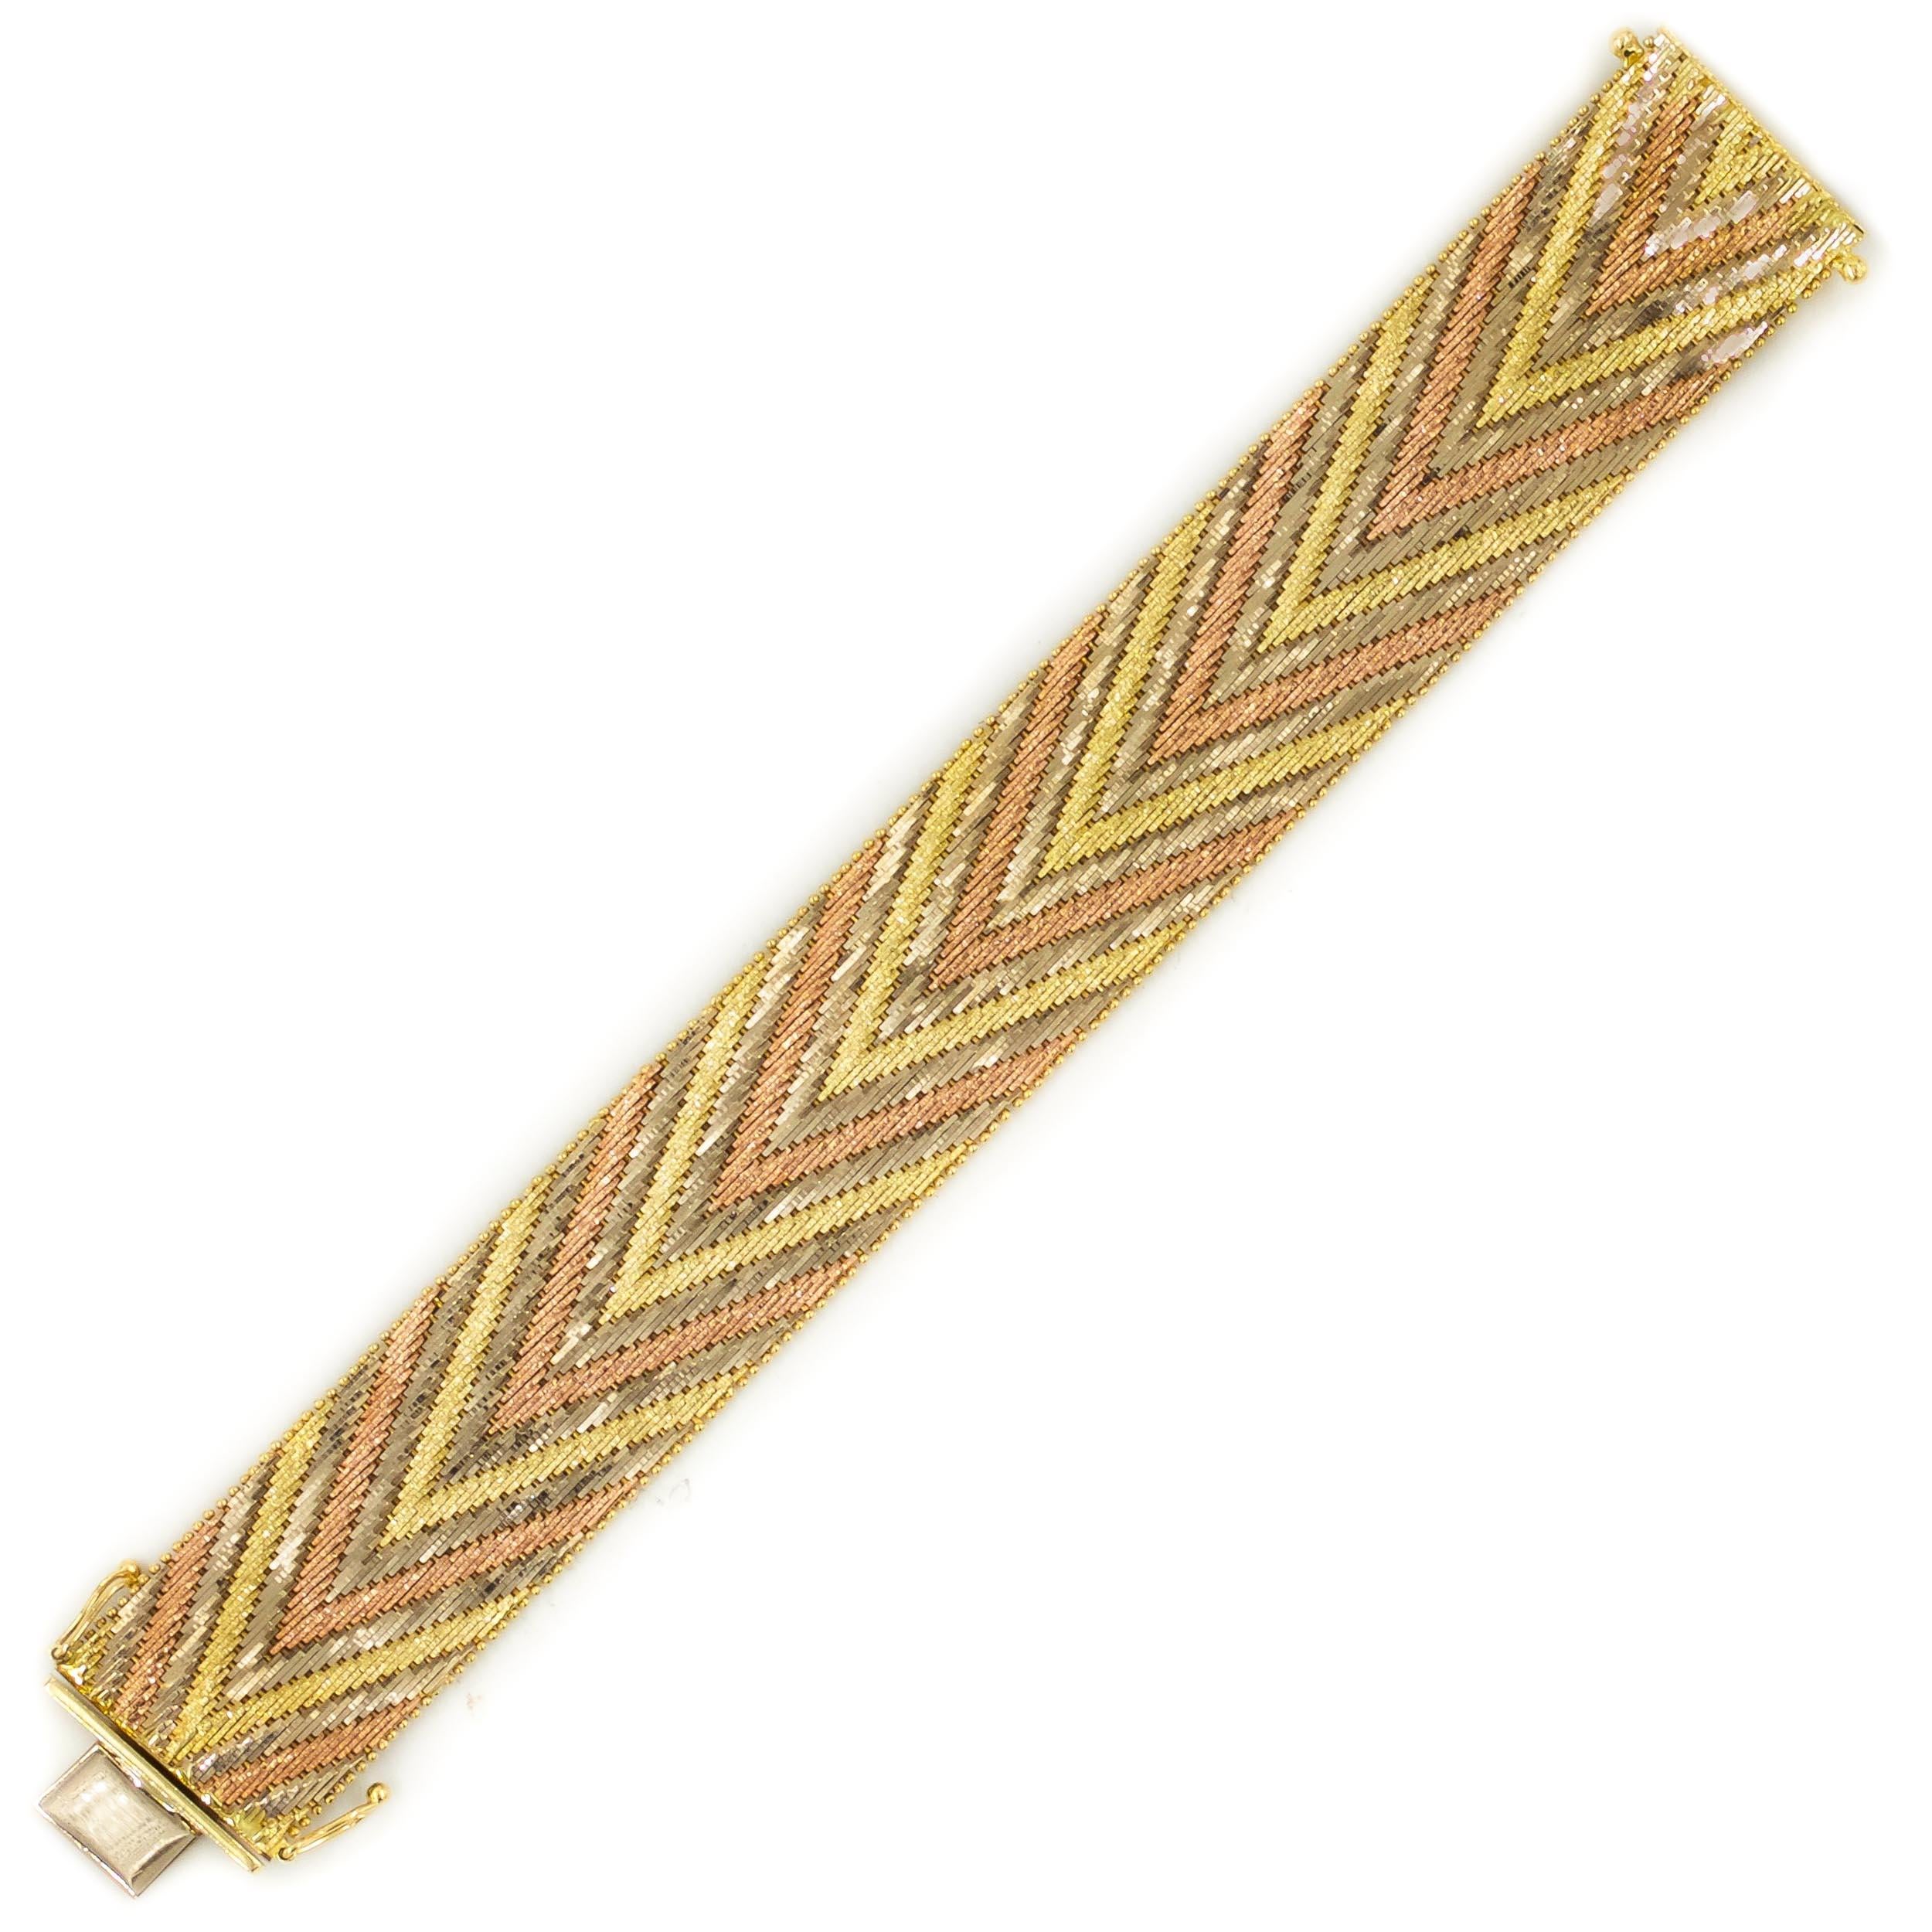 VINTAGE 14K SOLID YELLOW, WHITE AND ROSE GOLD CHEVRON PATTERNED BRACELET
With a slinky flexible profile  75.5 grams total weight  circa 1940-60
Item # 111RIK03X 

A very fine chevron patterned flexible-link bracelet executed in solid 14k rose,